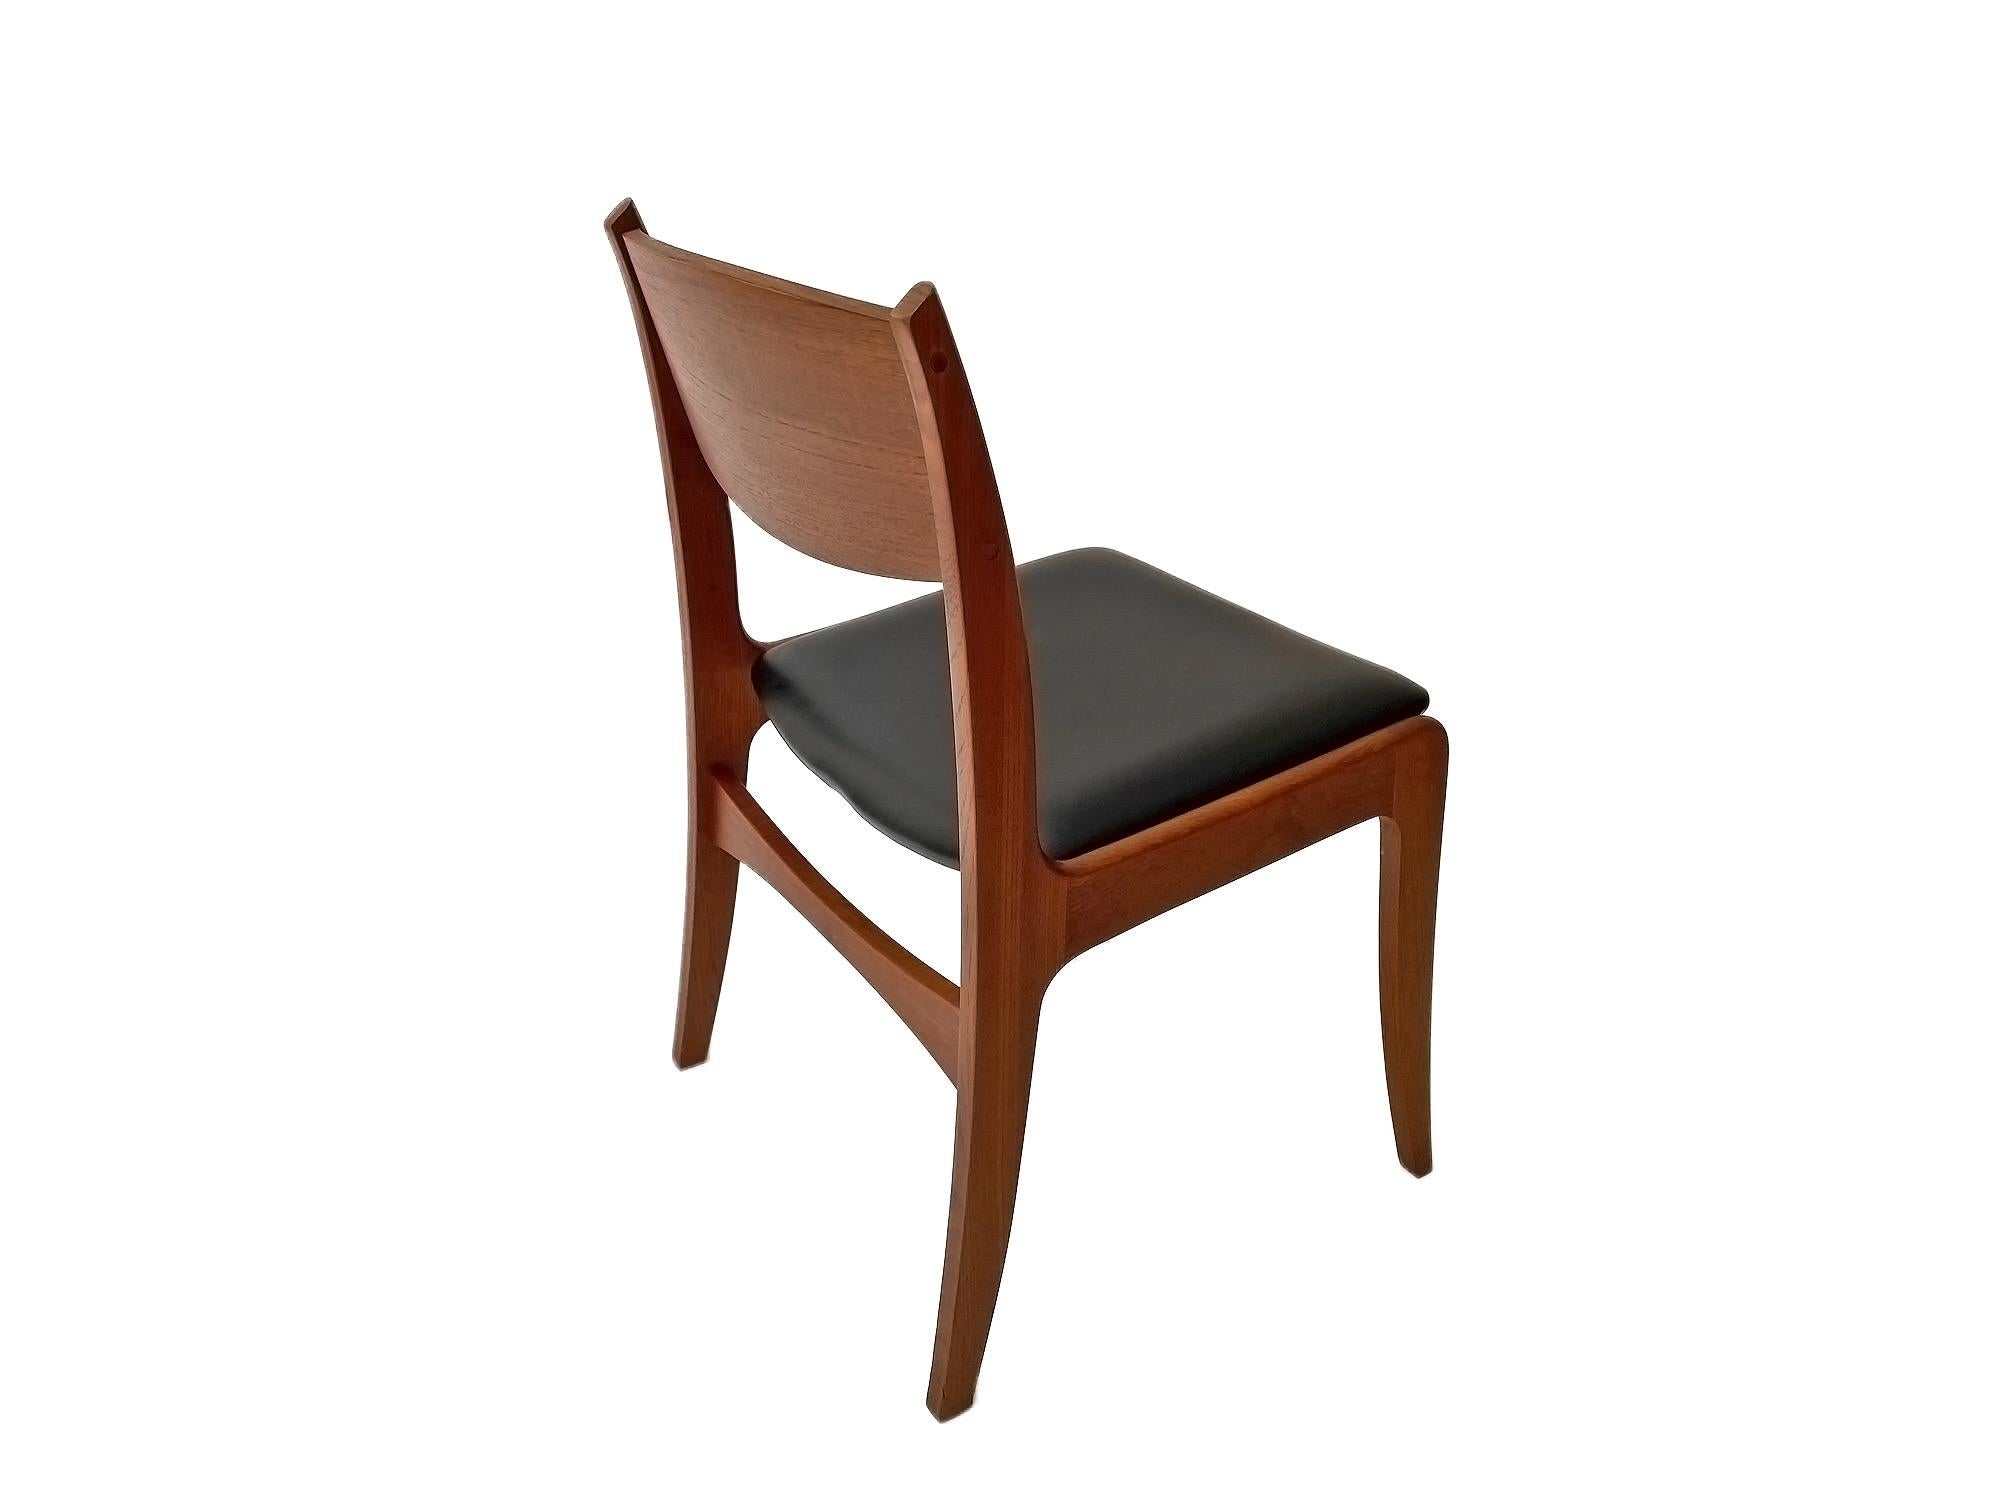 Danish Set of 4 Teak and Black Vinyl Dining Chairs, Mid Century 1960s For Sale 5